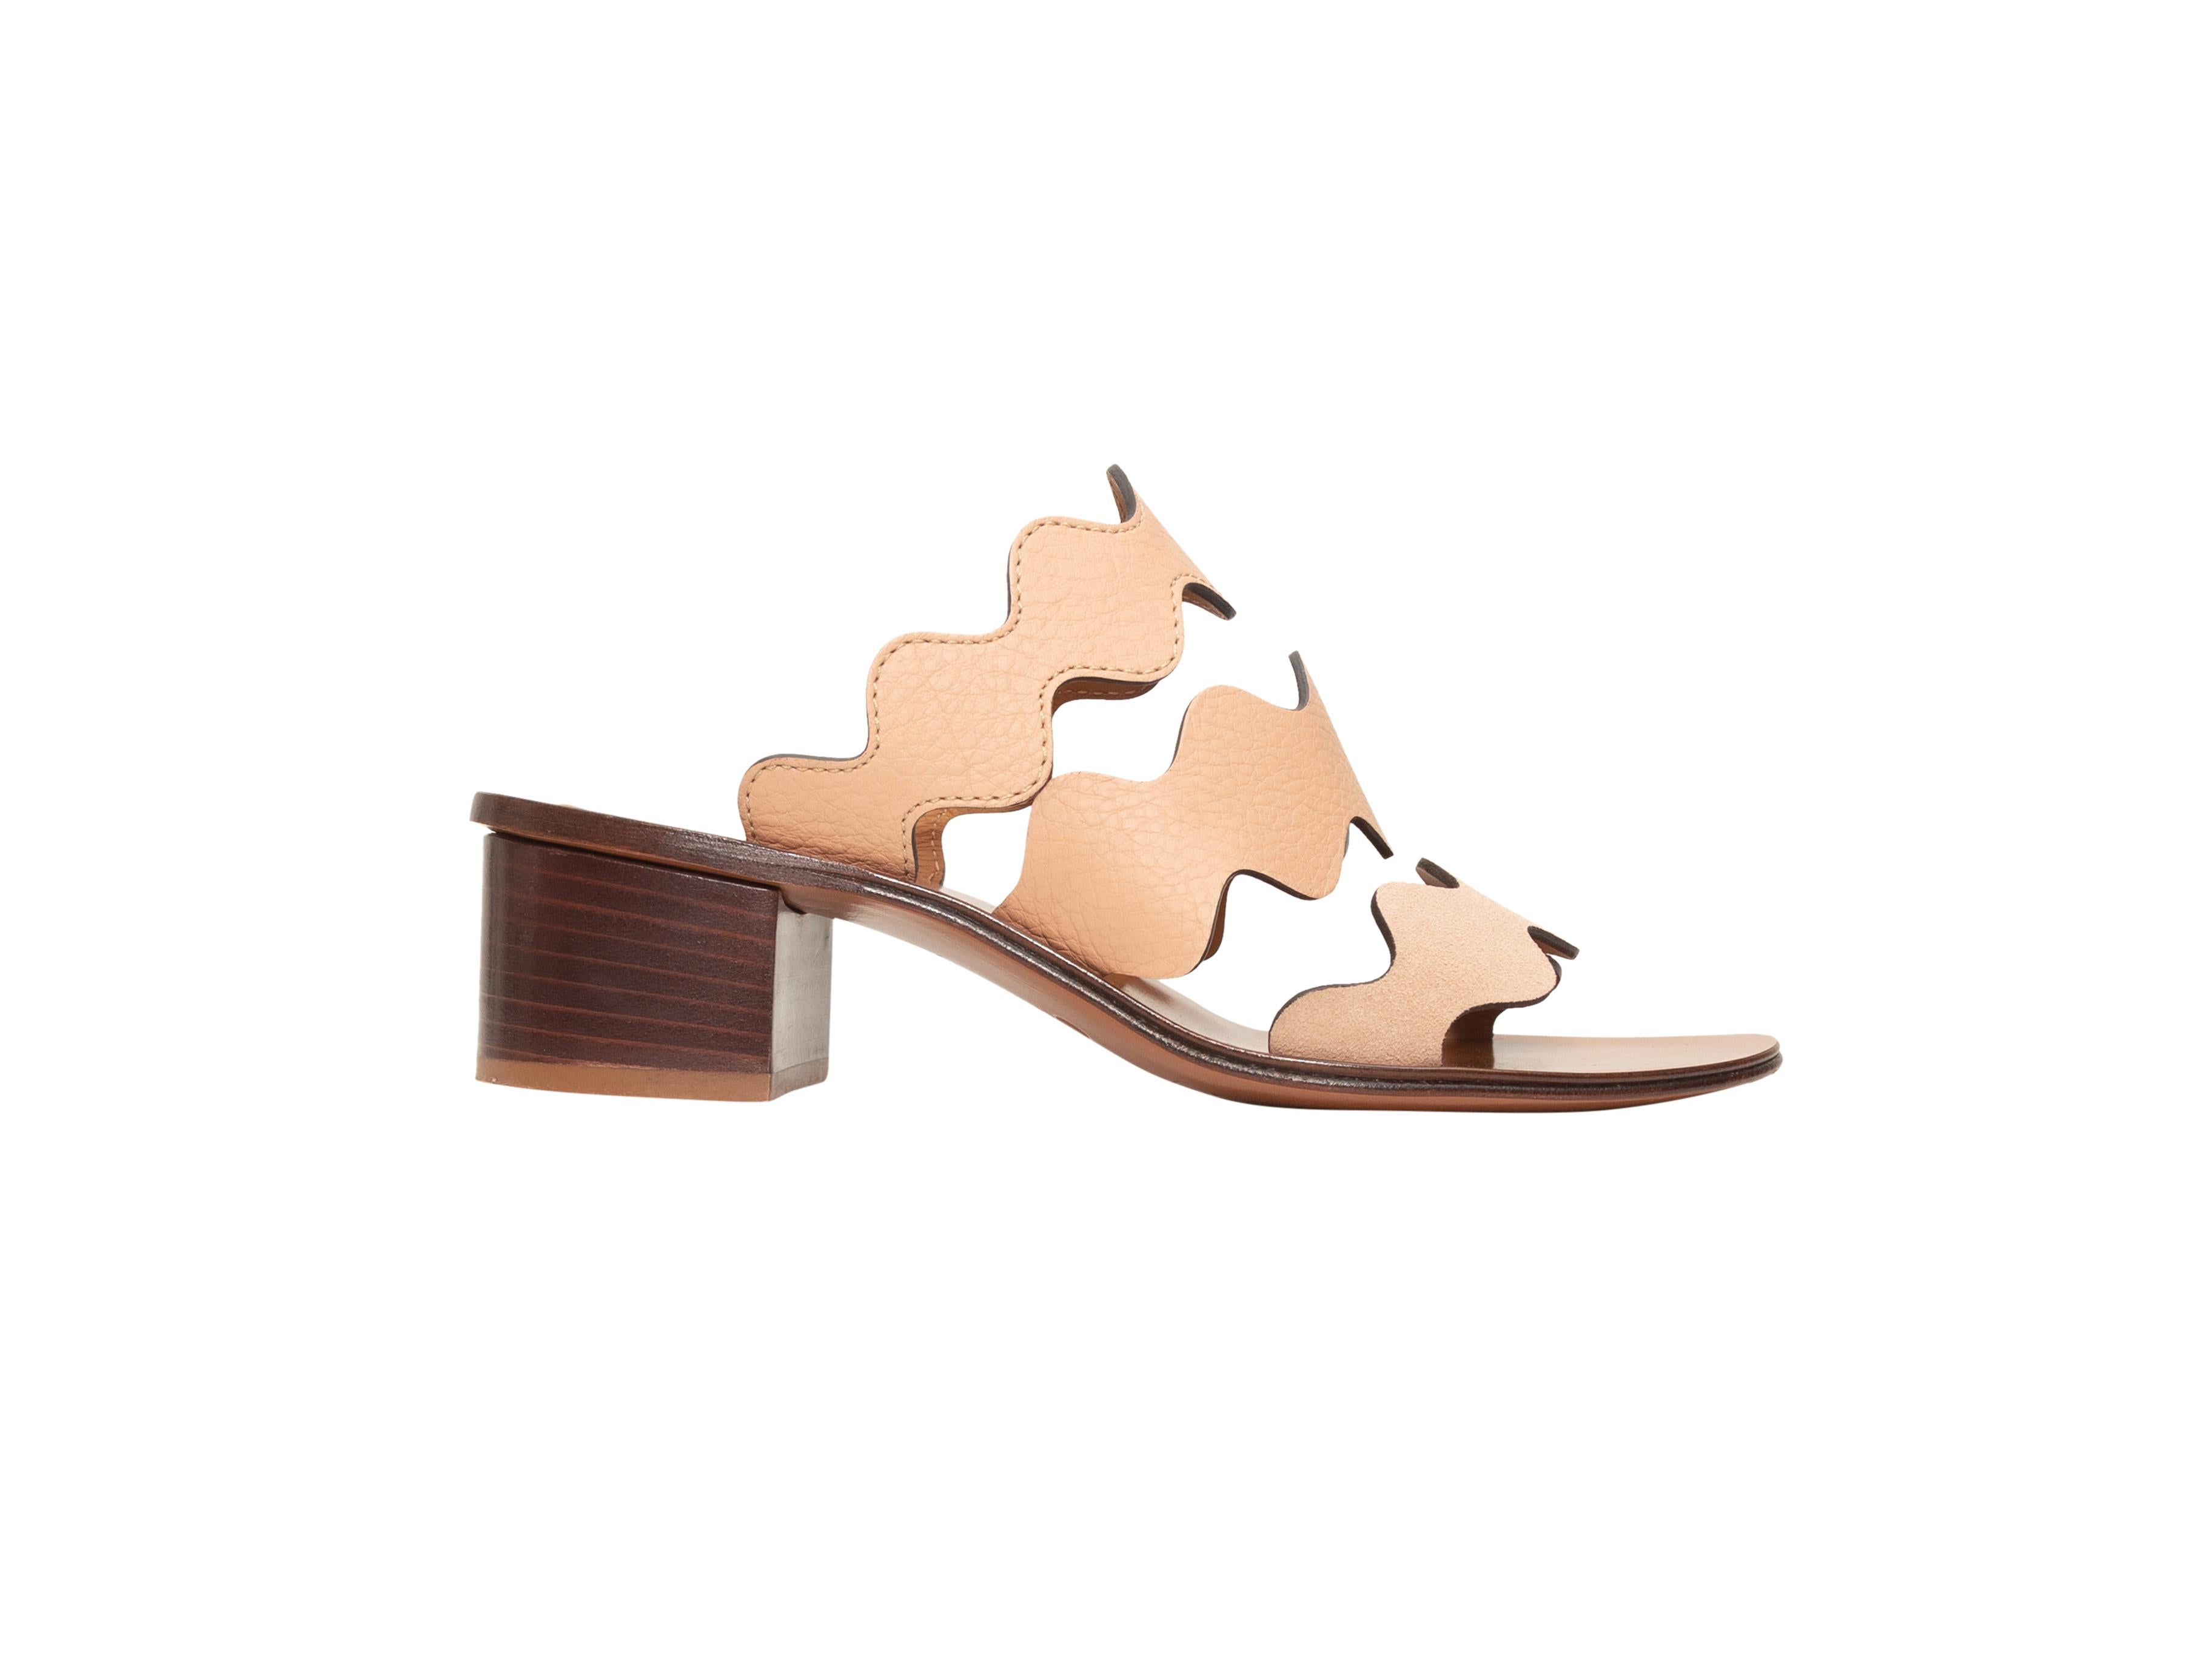 Product details: Tan leather and suede Lauren triple strap sandals by Chloe. Stacked heels. Designer size 36.5. 2